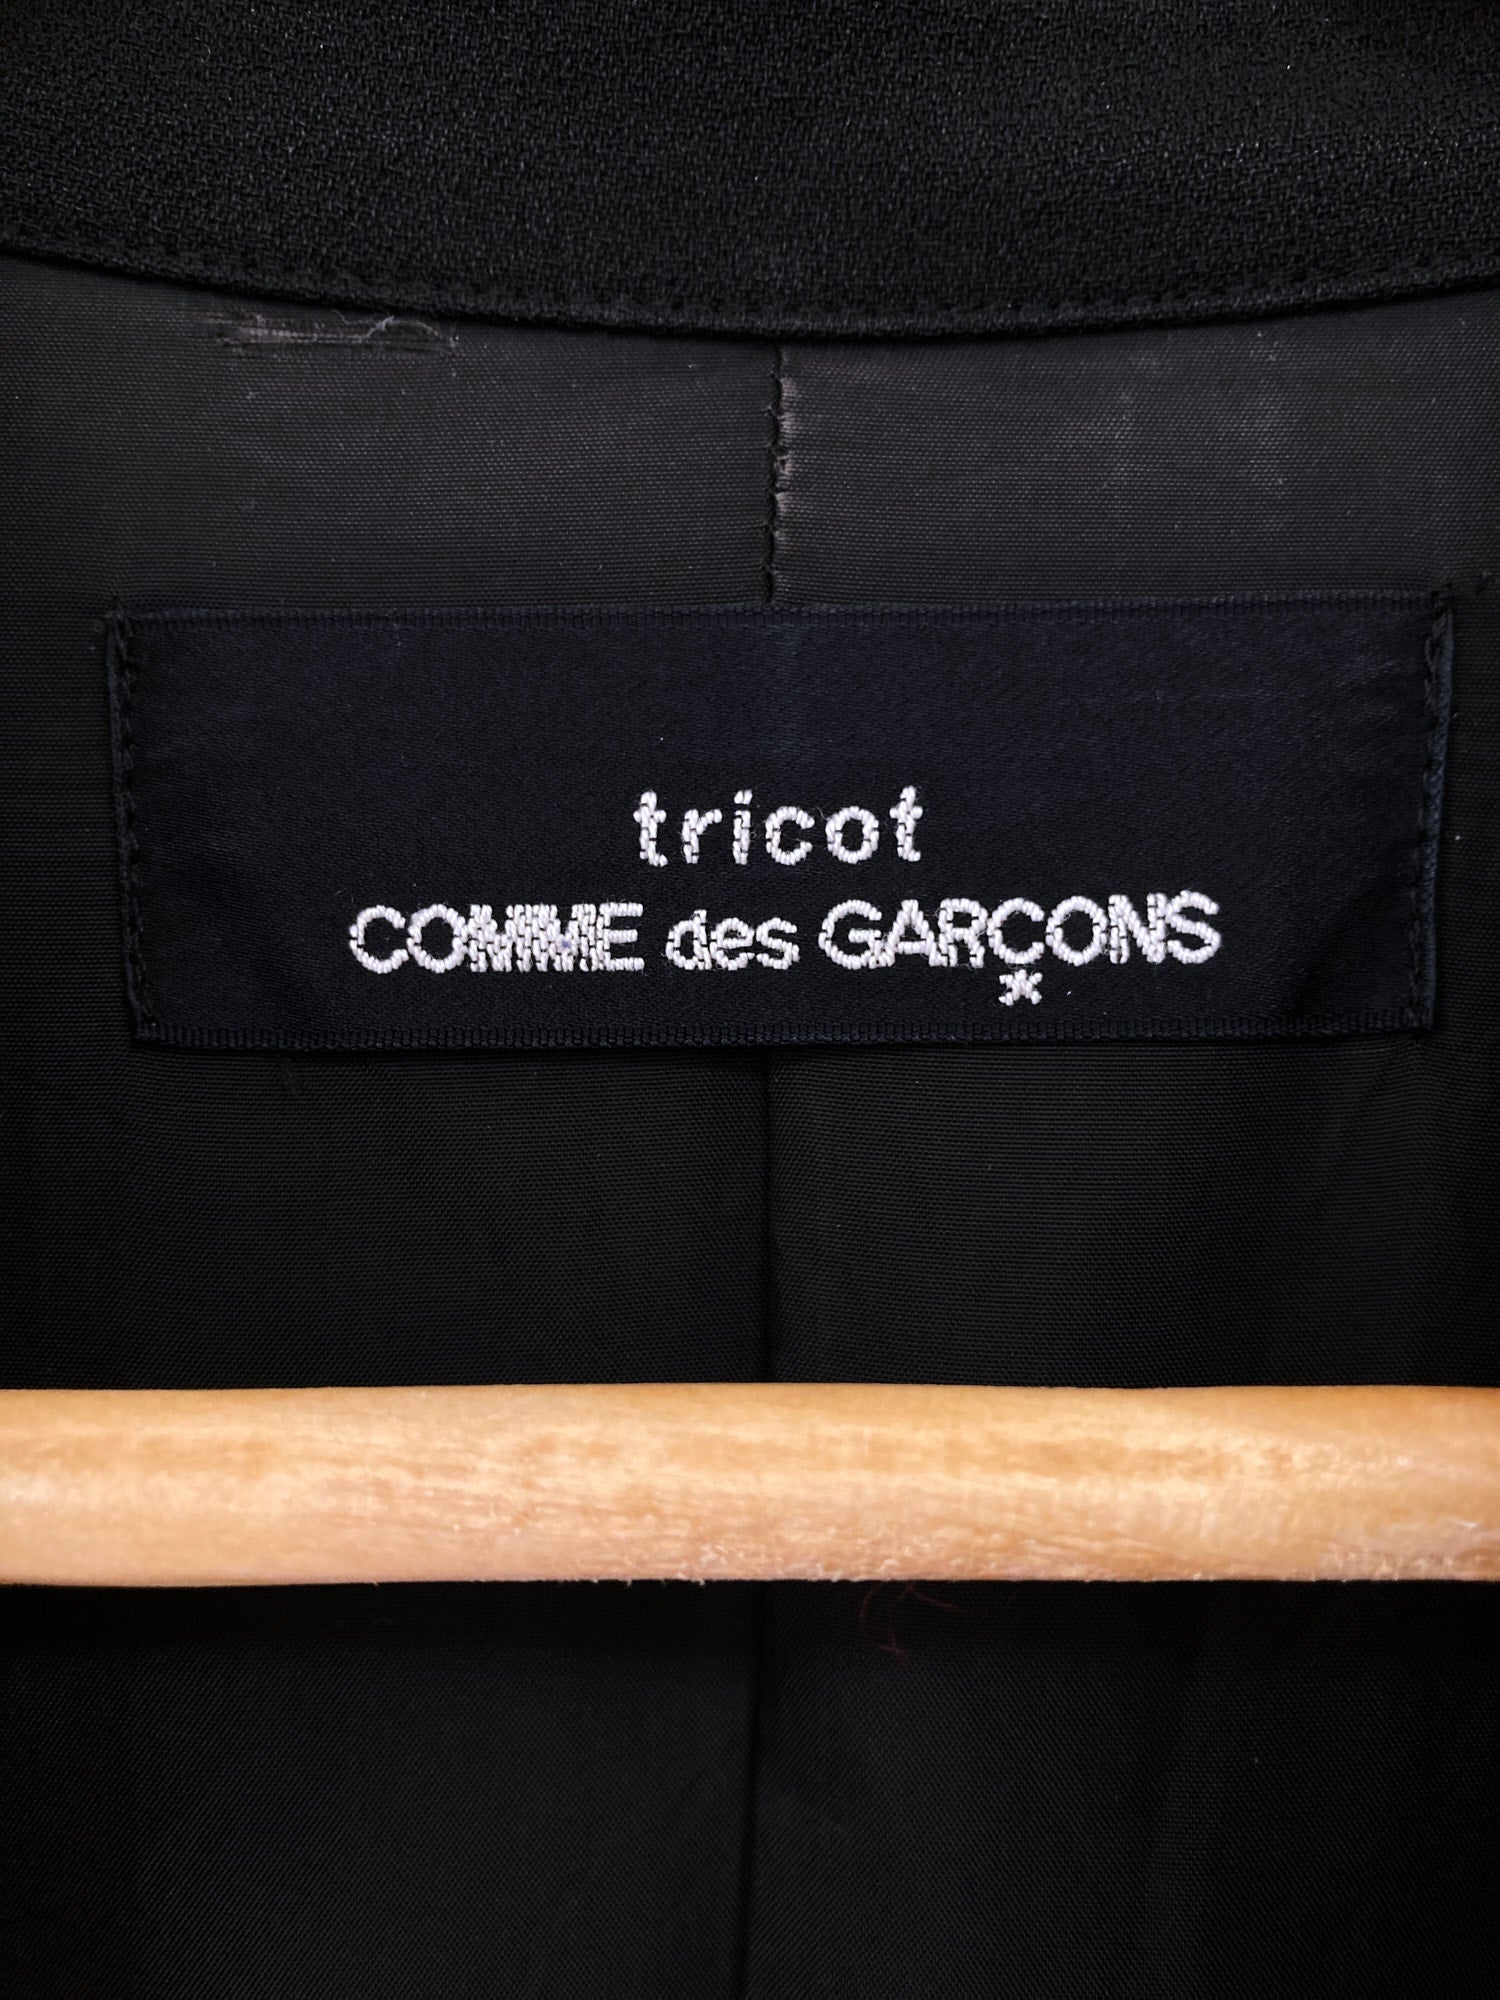 Tricot Comme des Garcons 1995 black zip jacket with security tag still  attached